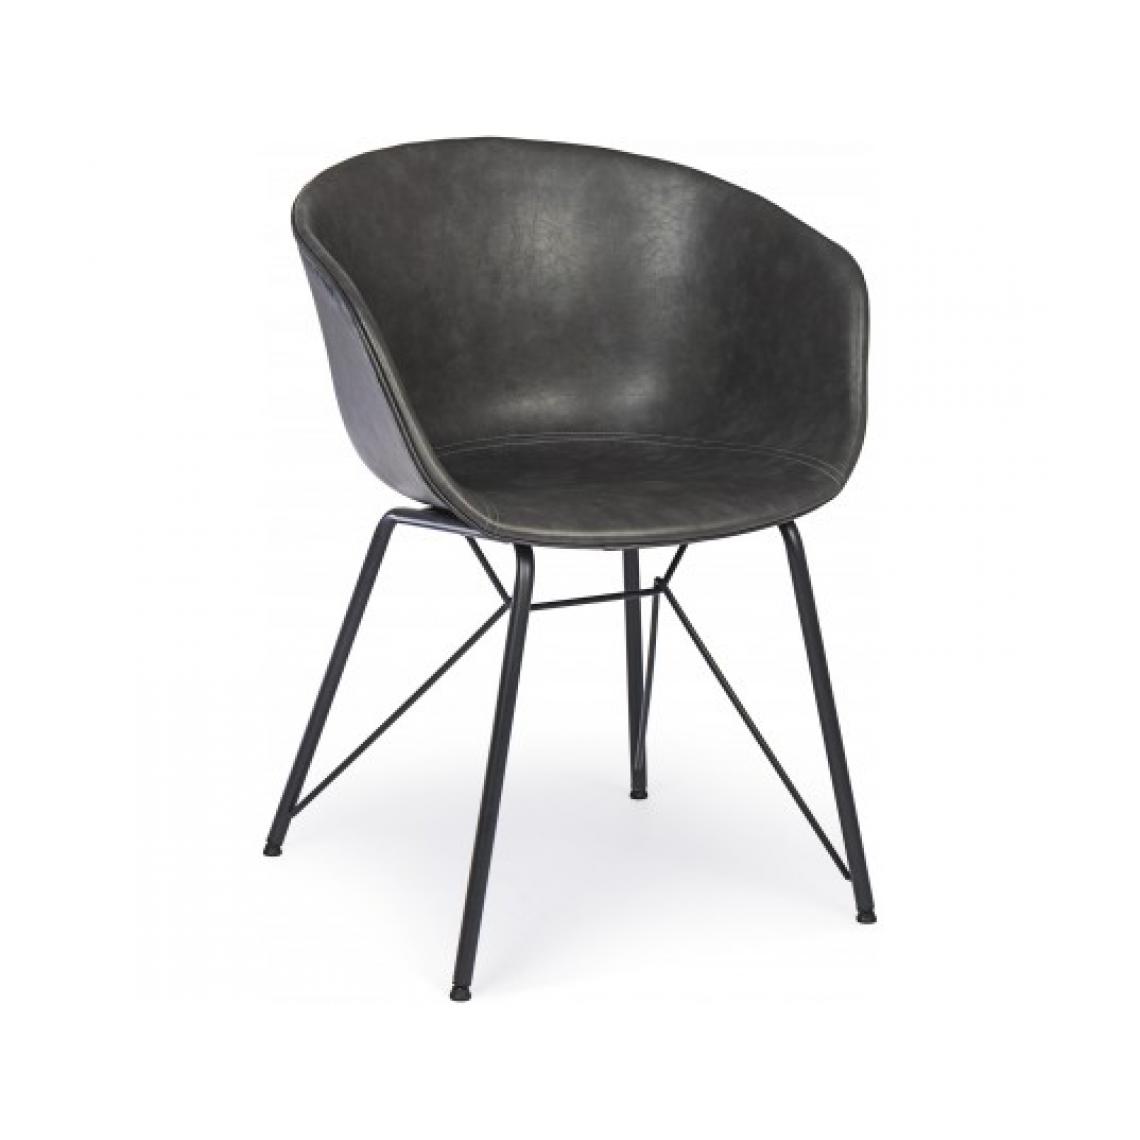 Bizzotto - Chaise Warhol simili cuir anthracite - Chaises